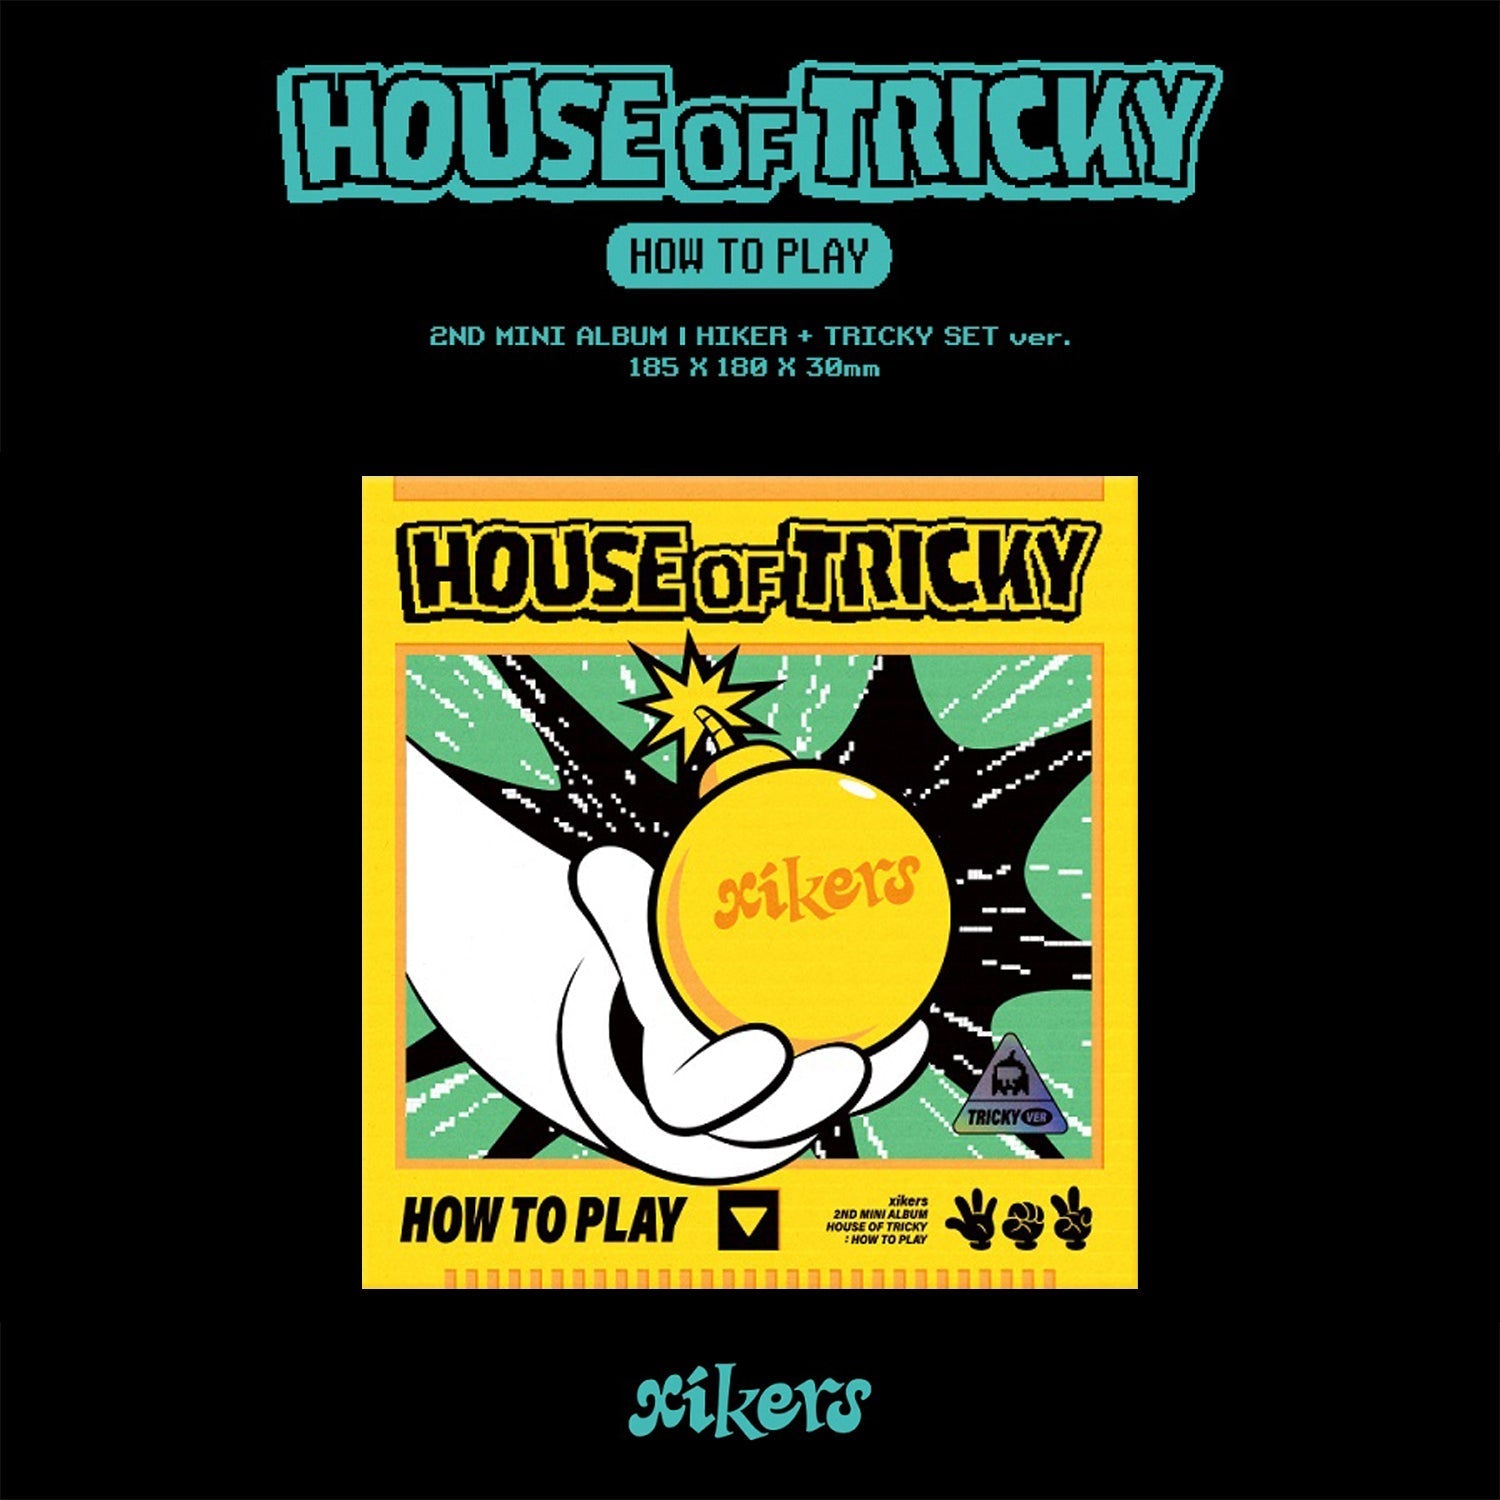 xikers - [HOUSE OF TRICKY : HOW TO PLAY] (2nd Mini Album TRICKY Version)